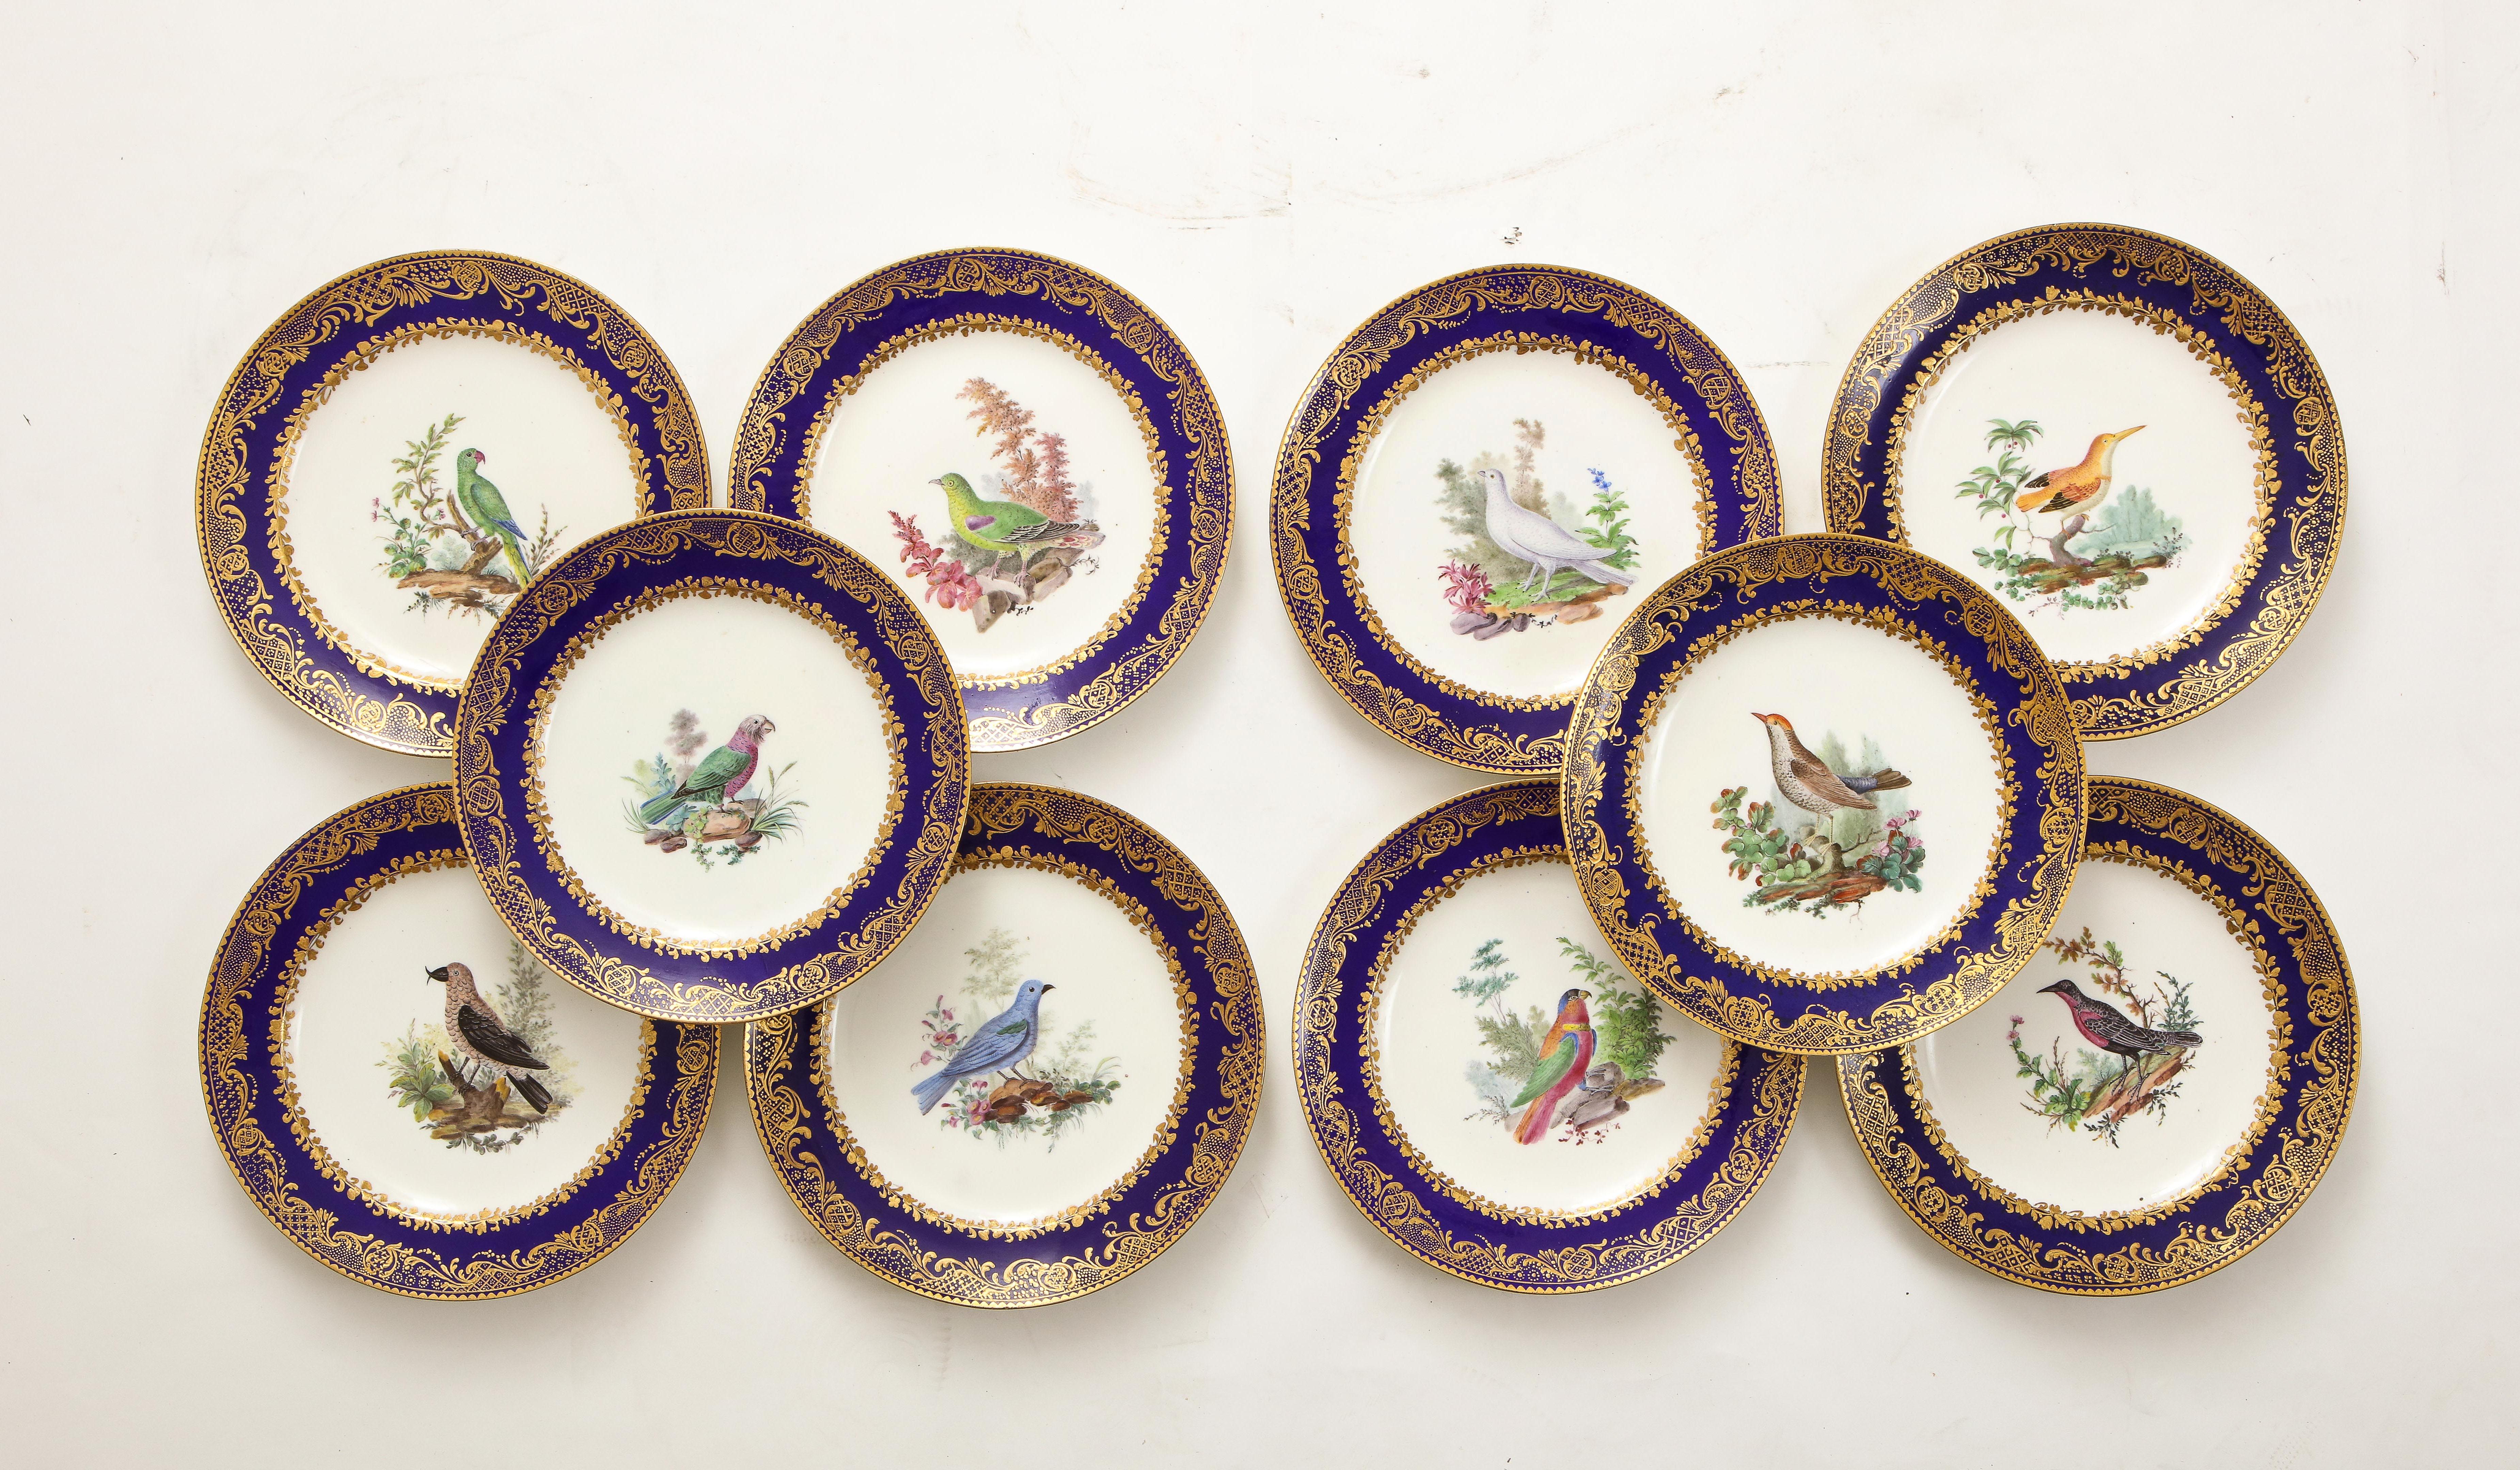 A Magnificent Set of Ten 18th Century French Sevres Dark Blue Ground, Impasto Gilded Decoration, with Variable Center Bird Decorations. The outer rim is decorated in a notched gold band which runs the extent of the border. Just inside the border is